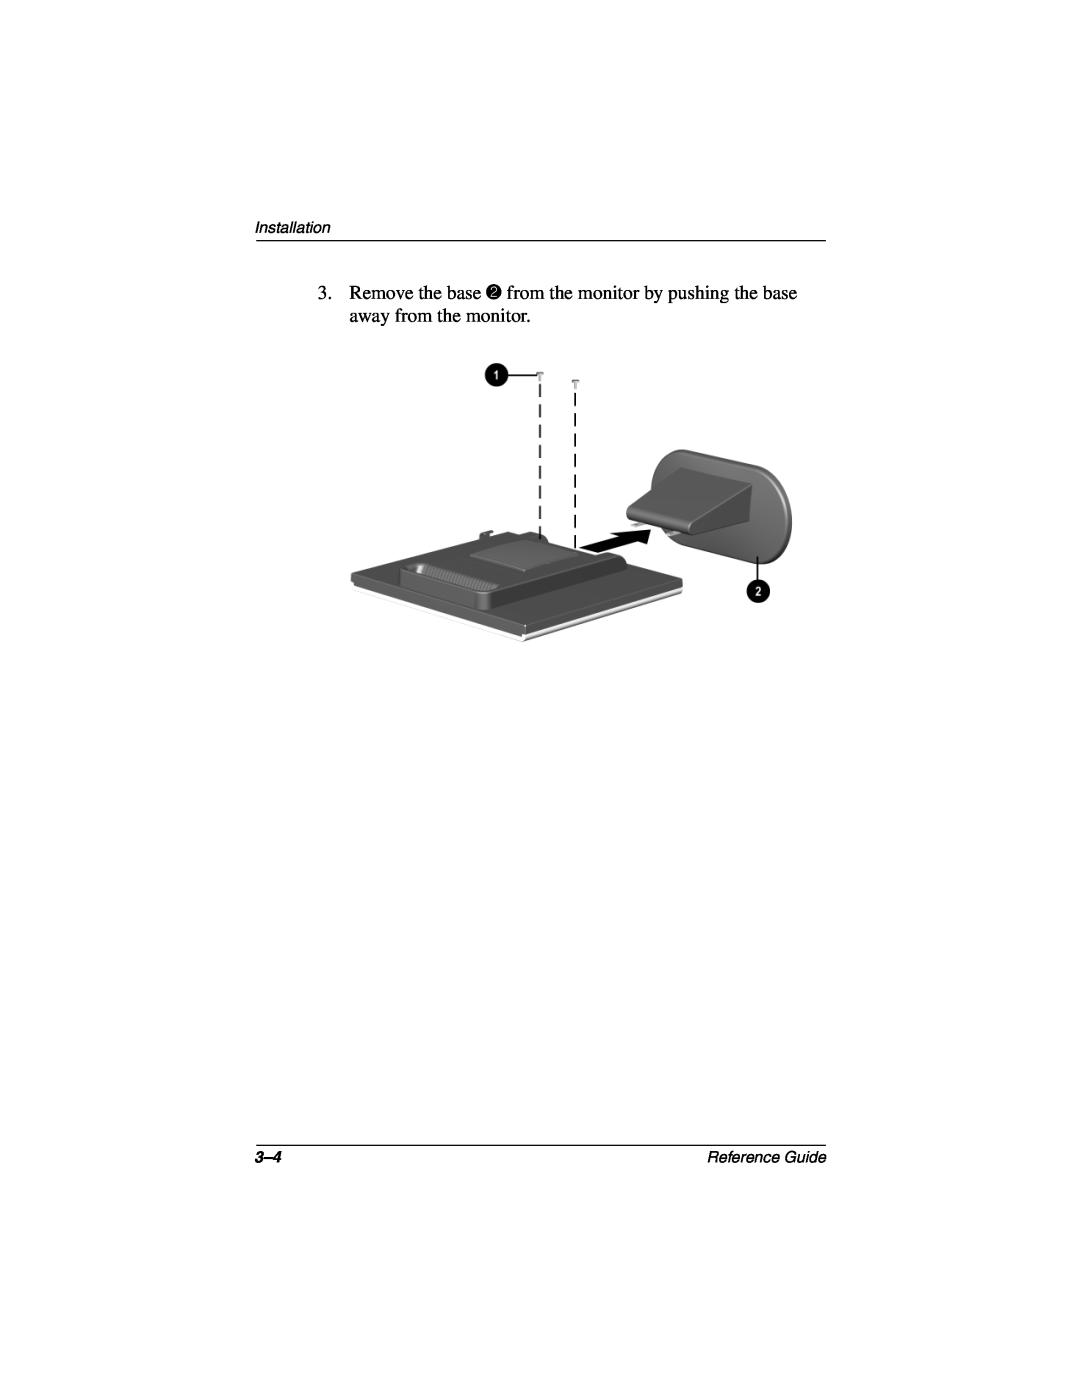 Compaq 5017 manual Installation, Reference Guide 